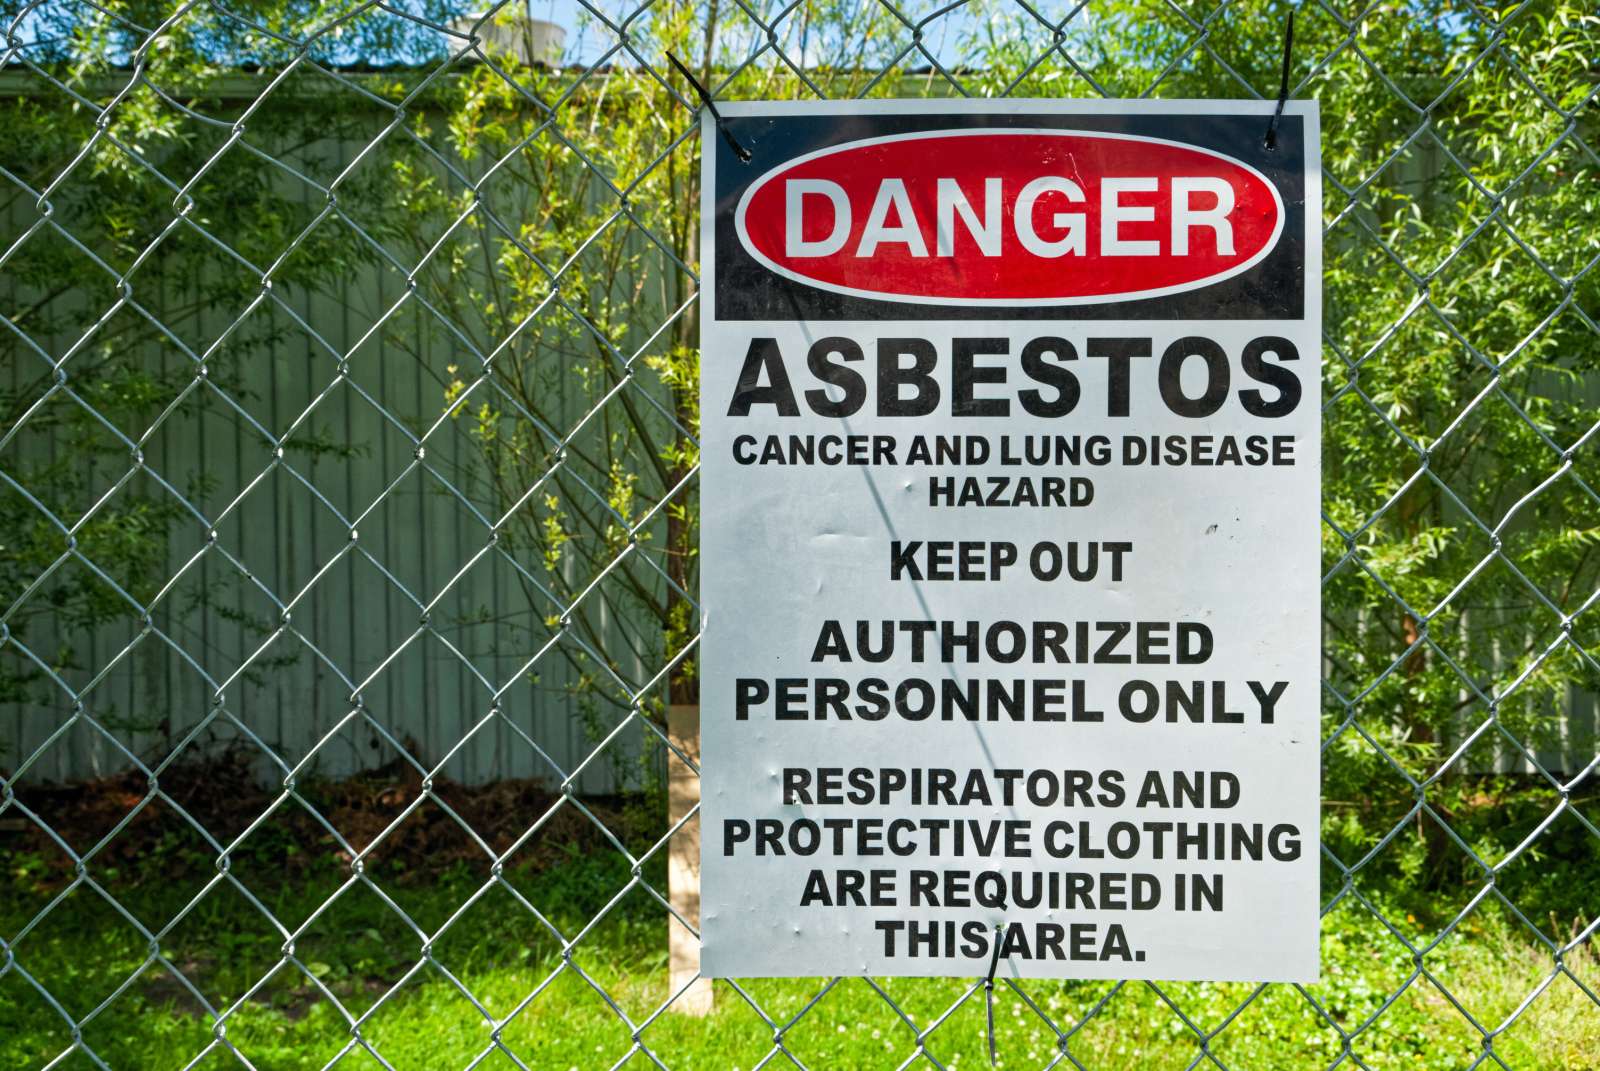 A sign is posted on a chain-link fence that says, "Danger: Asbestos. Cancer and lung disease hazard. Keep out. Authorized personnel only. Respirators and protective clothing are required in this area."